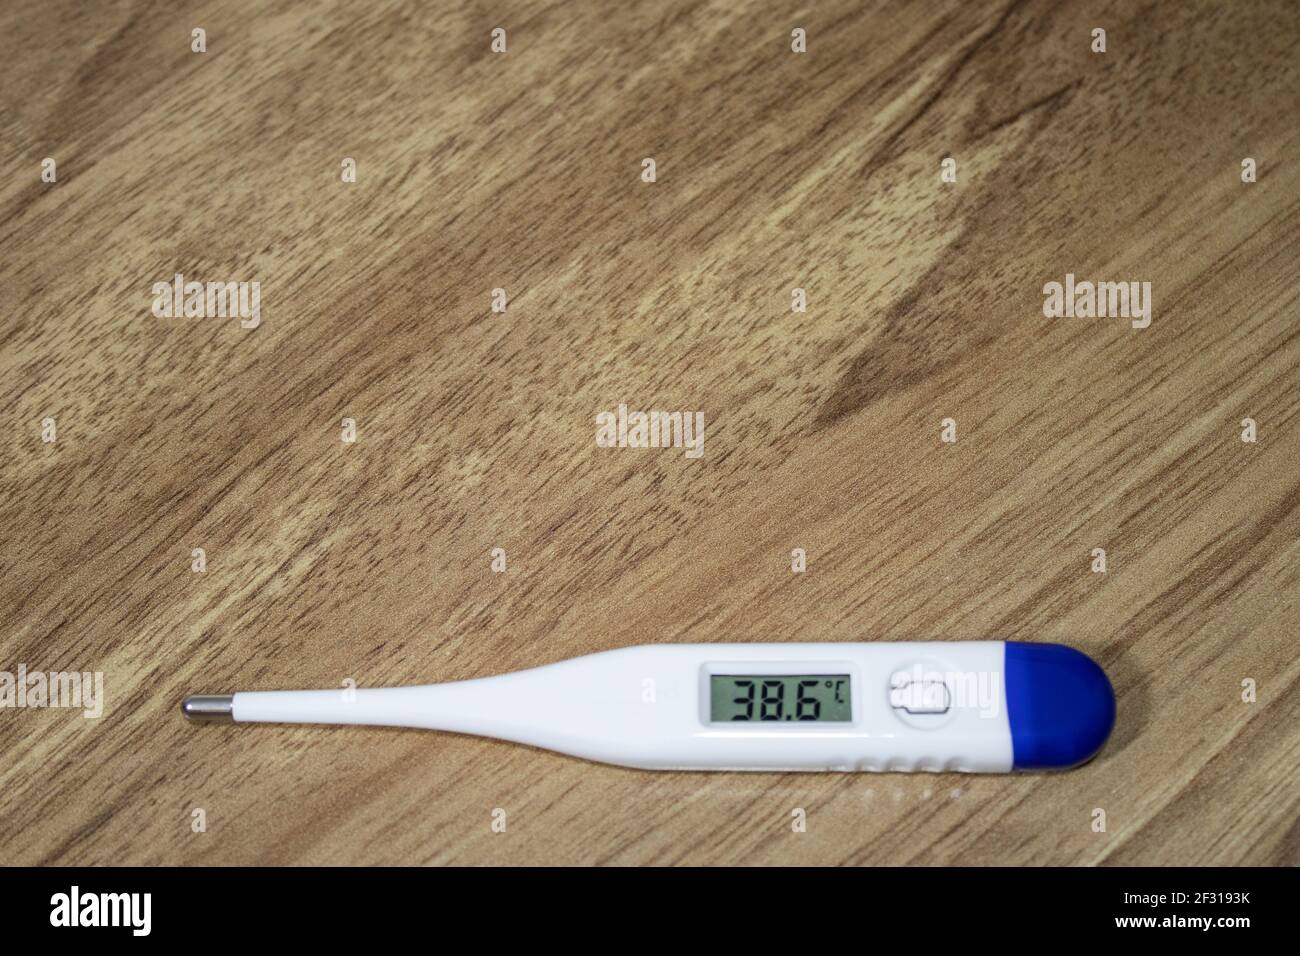 Thermometer with a blue handle and indicating 38 degrees, standing on a wooden table. High fever indicator. Stock Photo